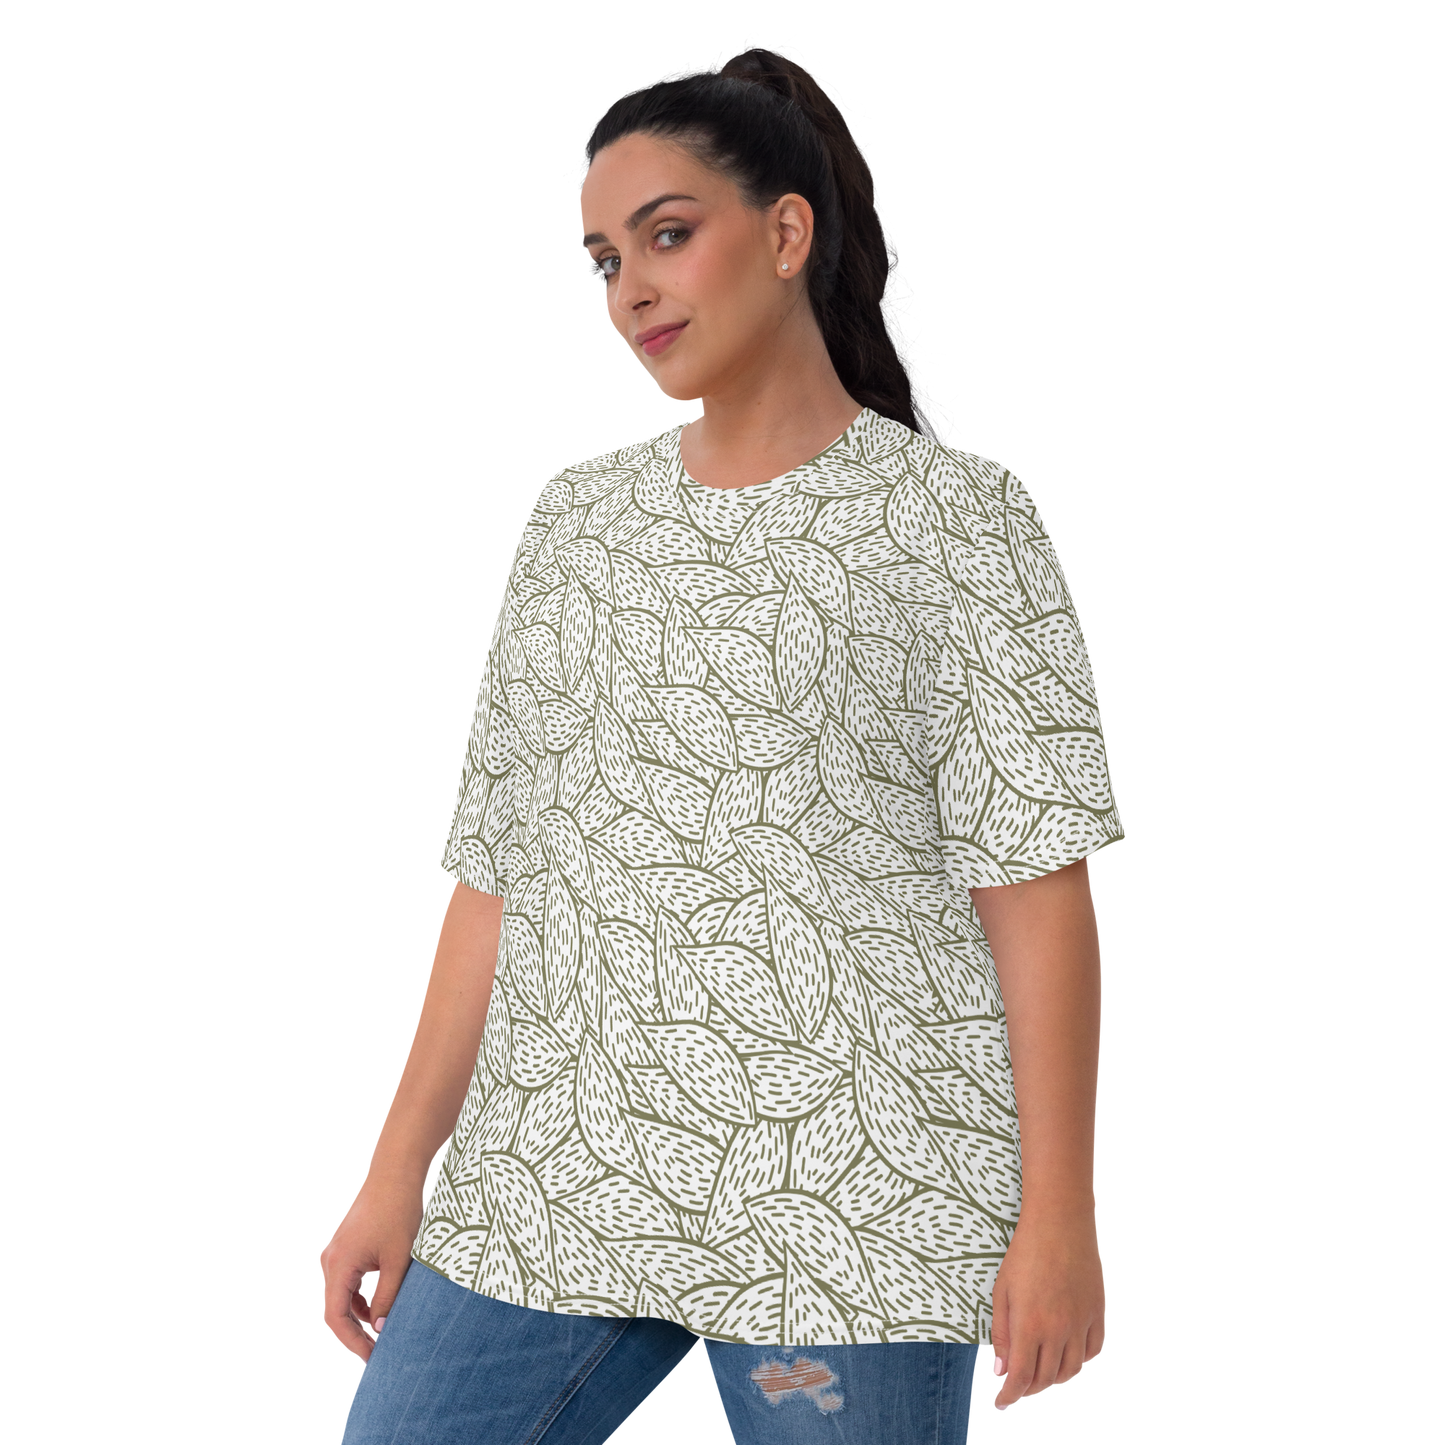 Colorful Fall Leaves | Seamless Patterns | All-Over Print Women's Crew Neck T-Shirt - #6